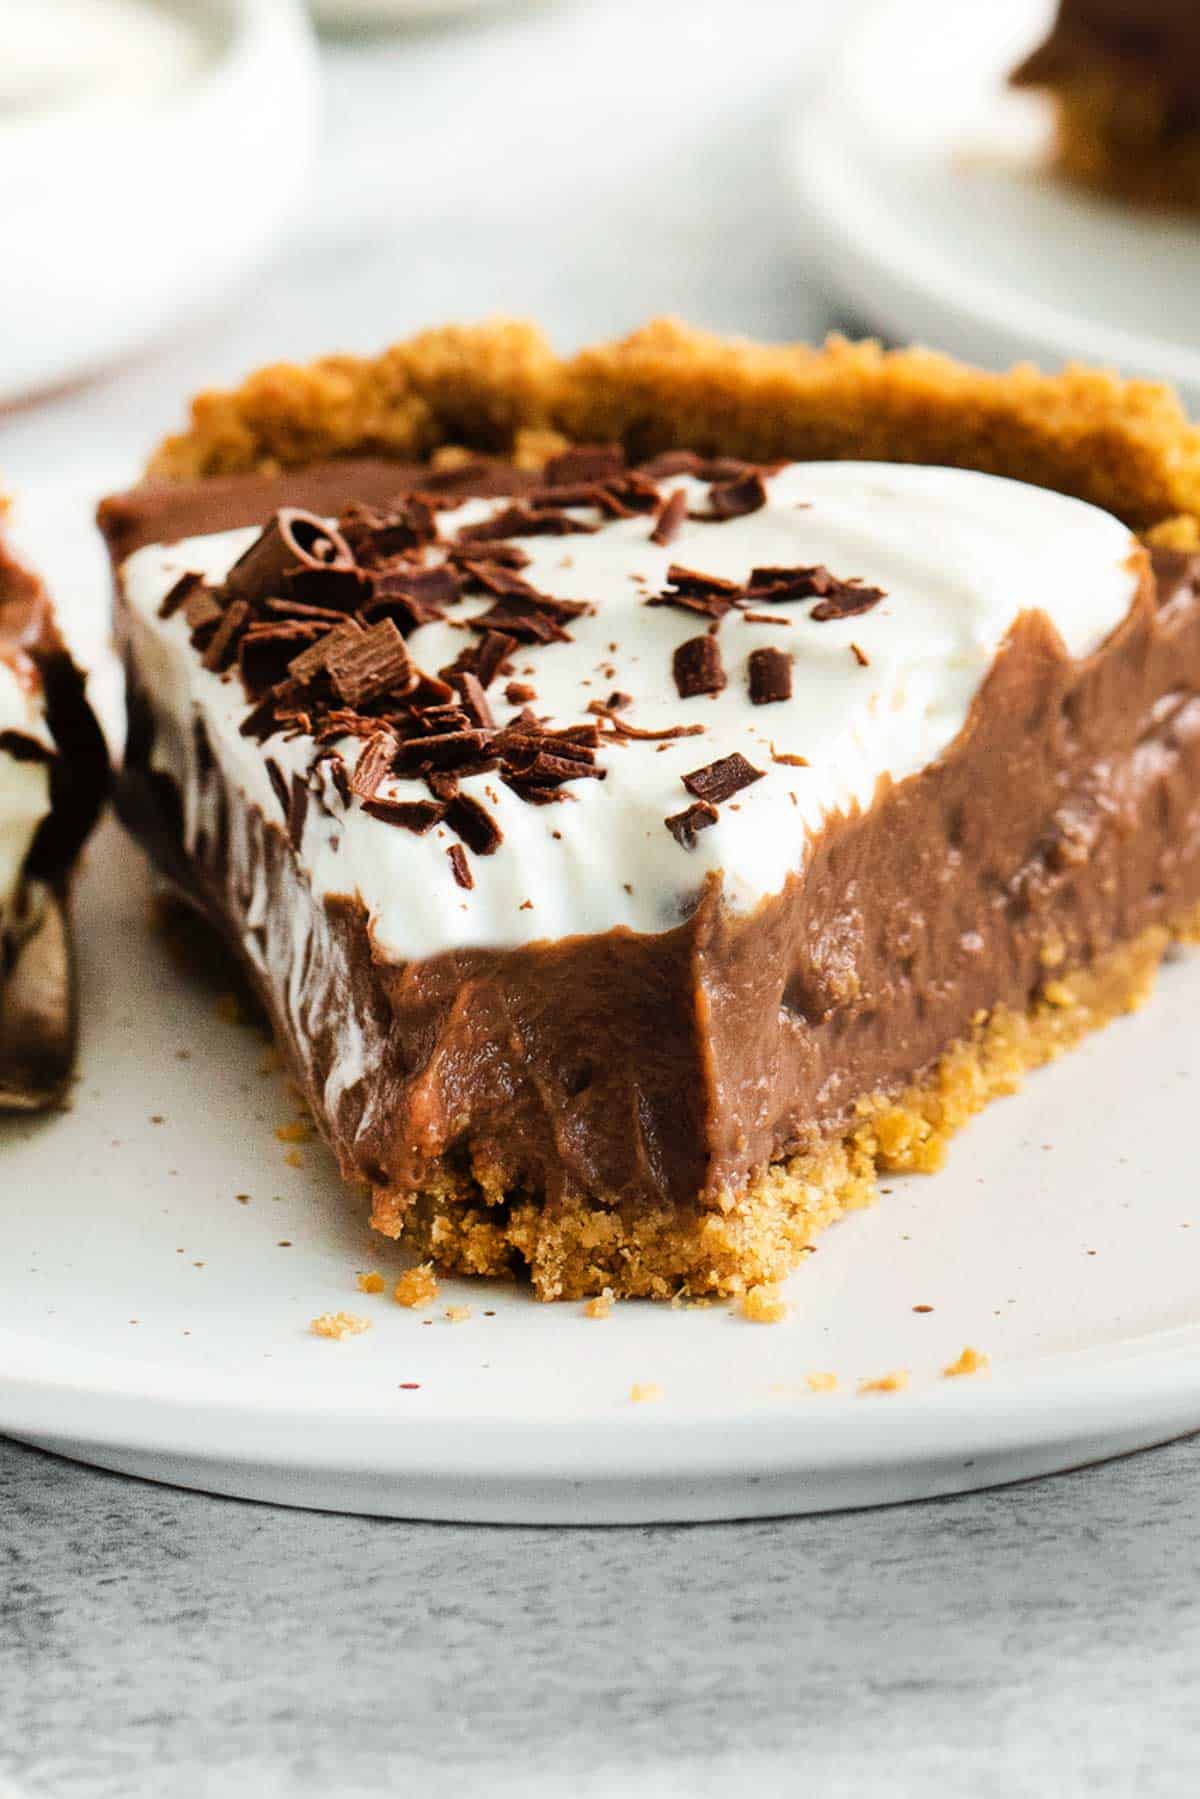 A slice of chocolate pie with a bite taken out of it